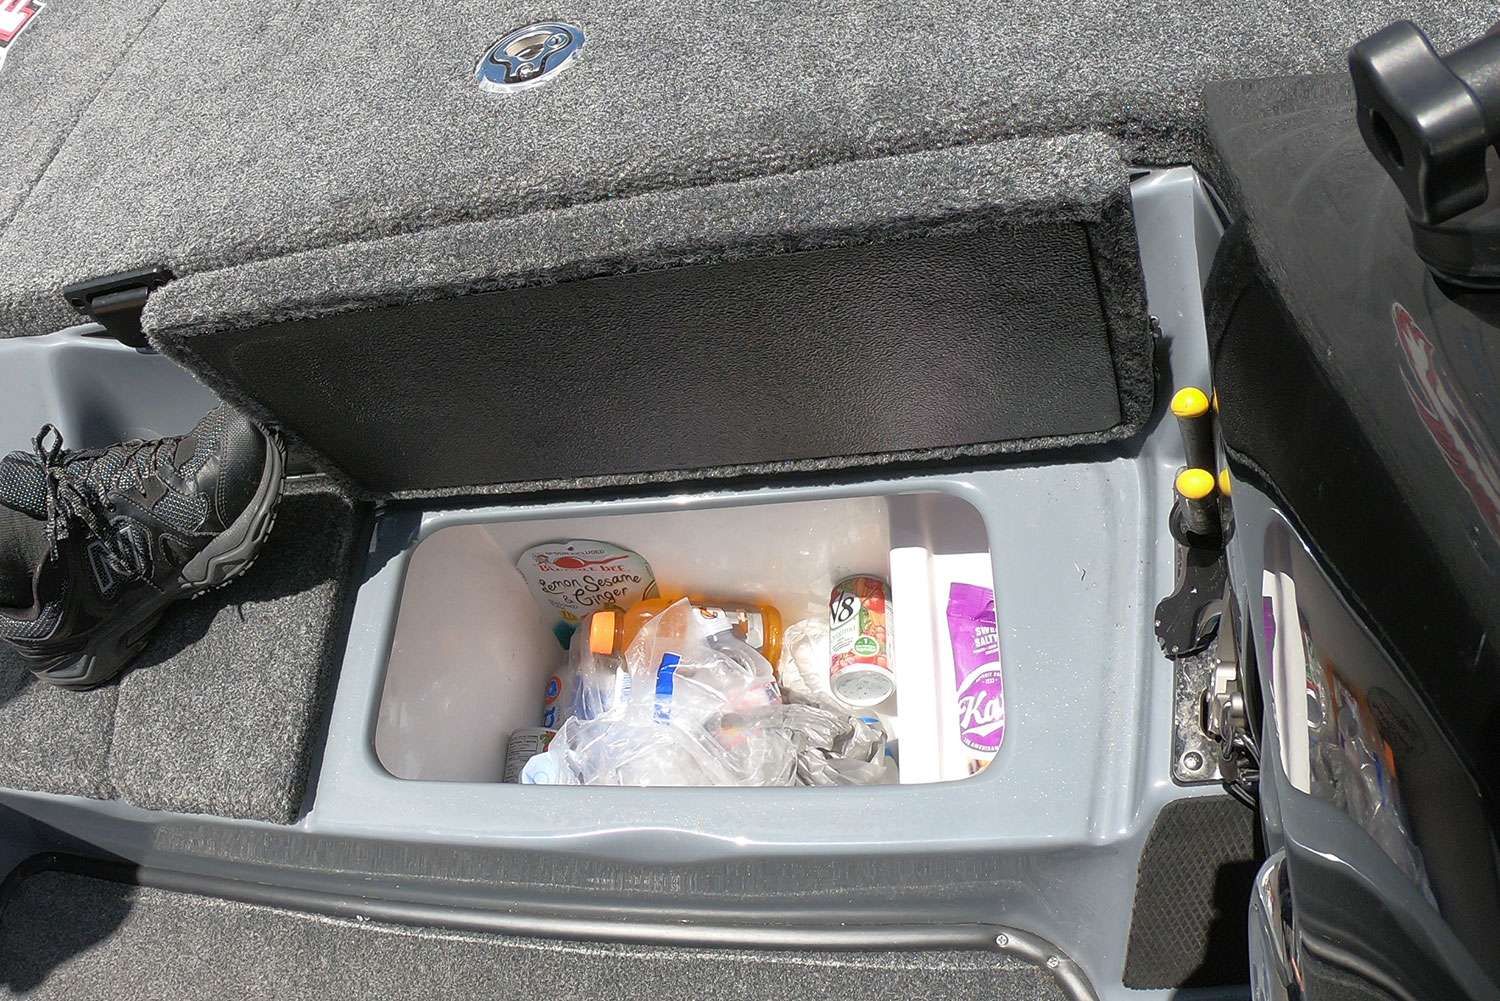 The cooler is the right size and keeps drinks and food cool.